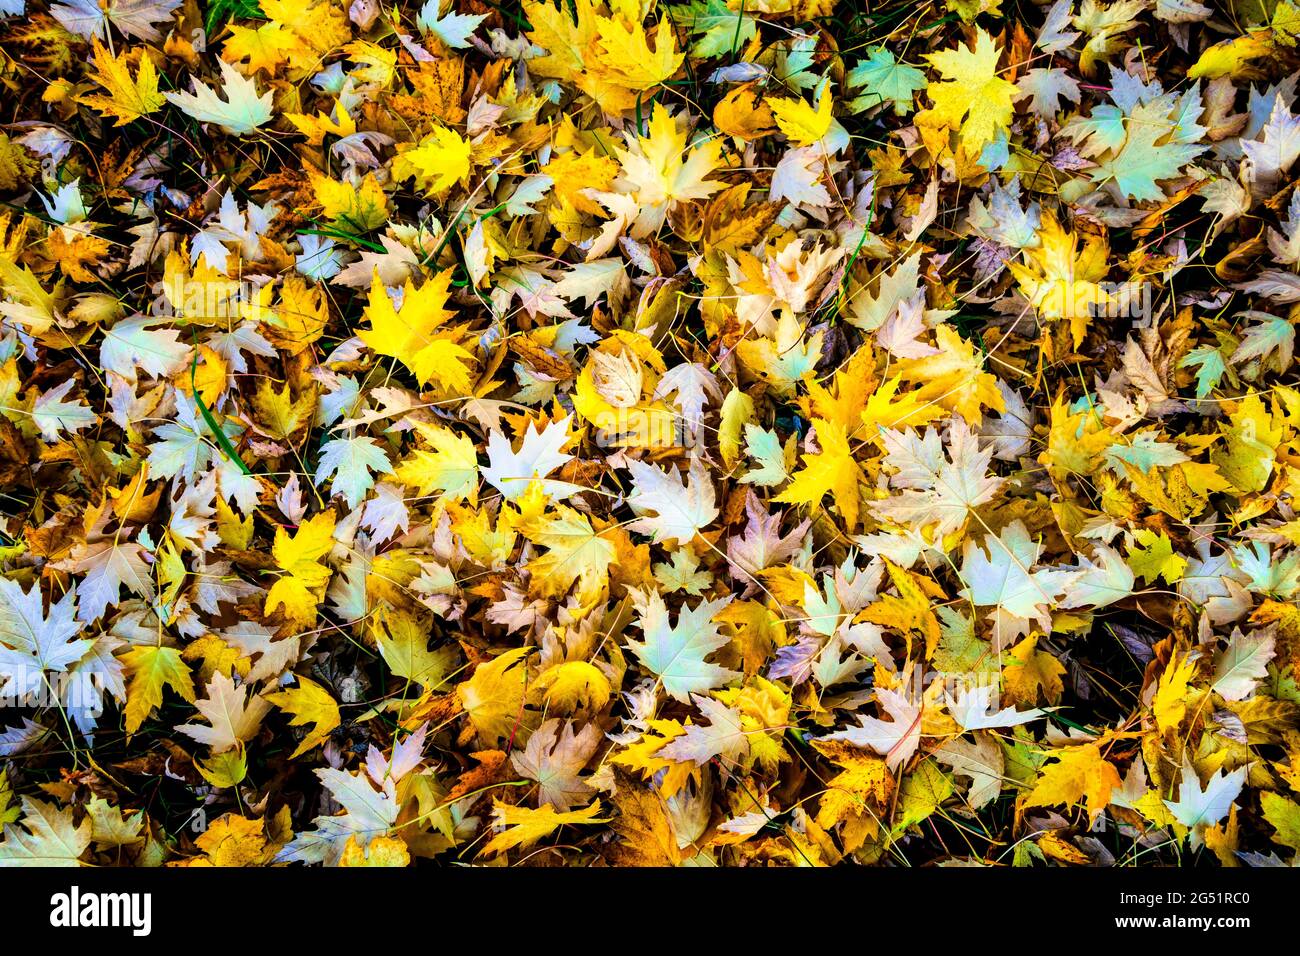 High angle view of autumn colored leaves on forest floor Stock Photo